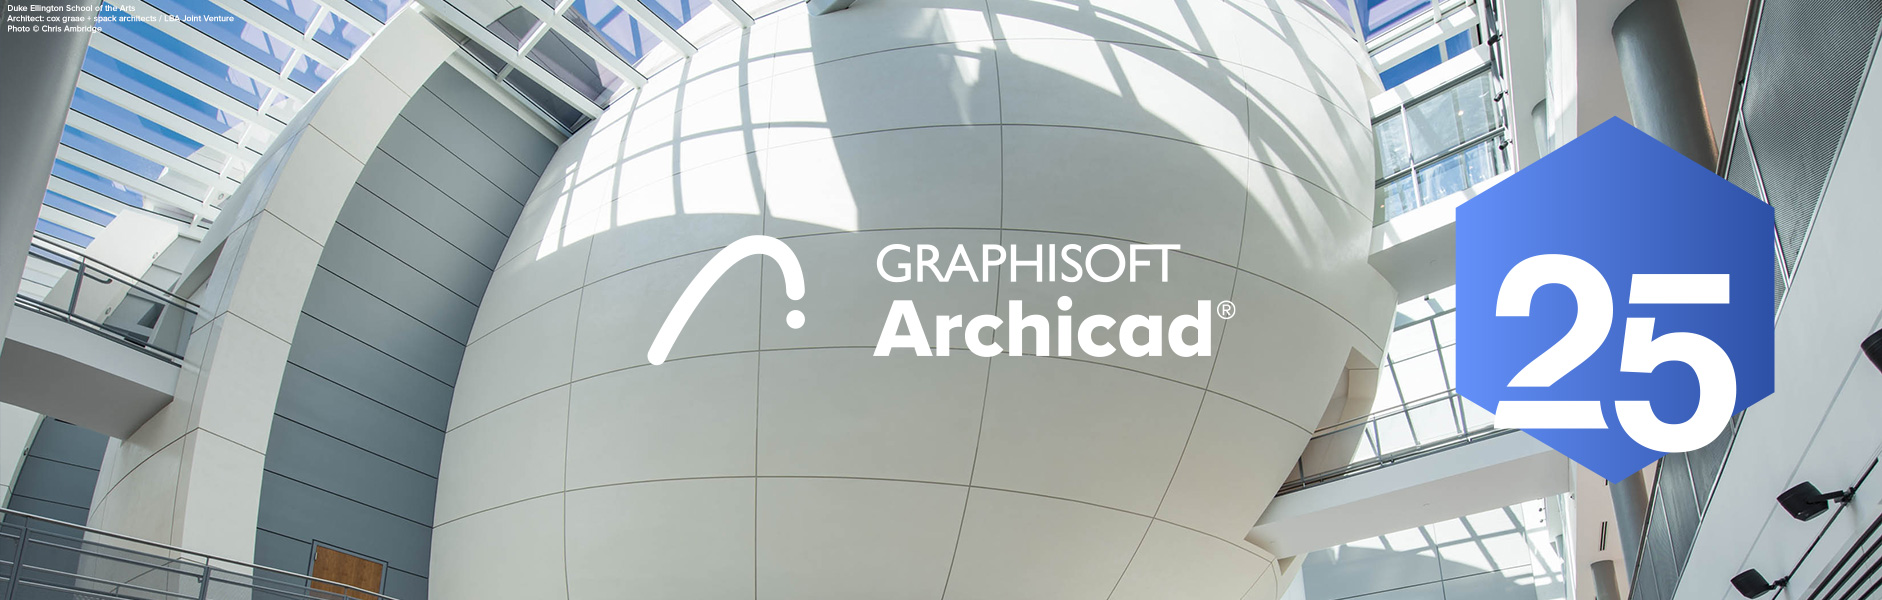 GRAPHISOFT ARCHICAD 25 Free Download